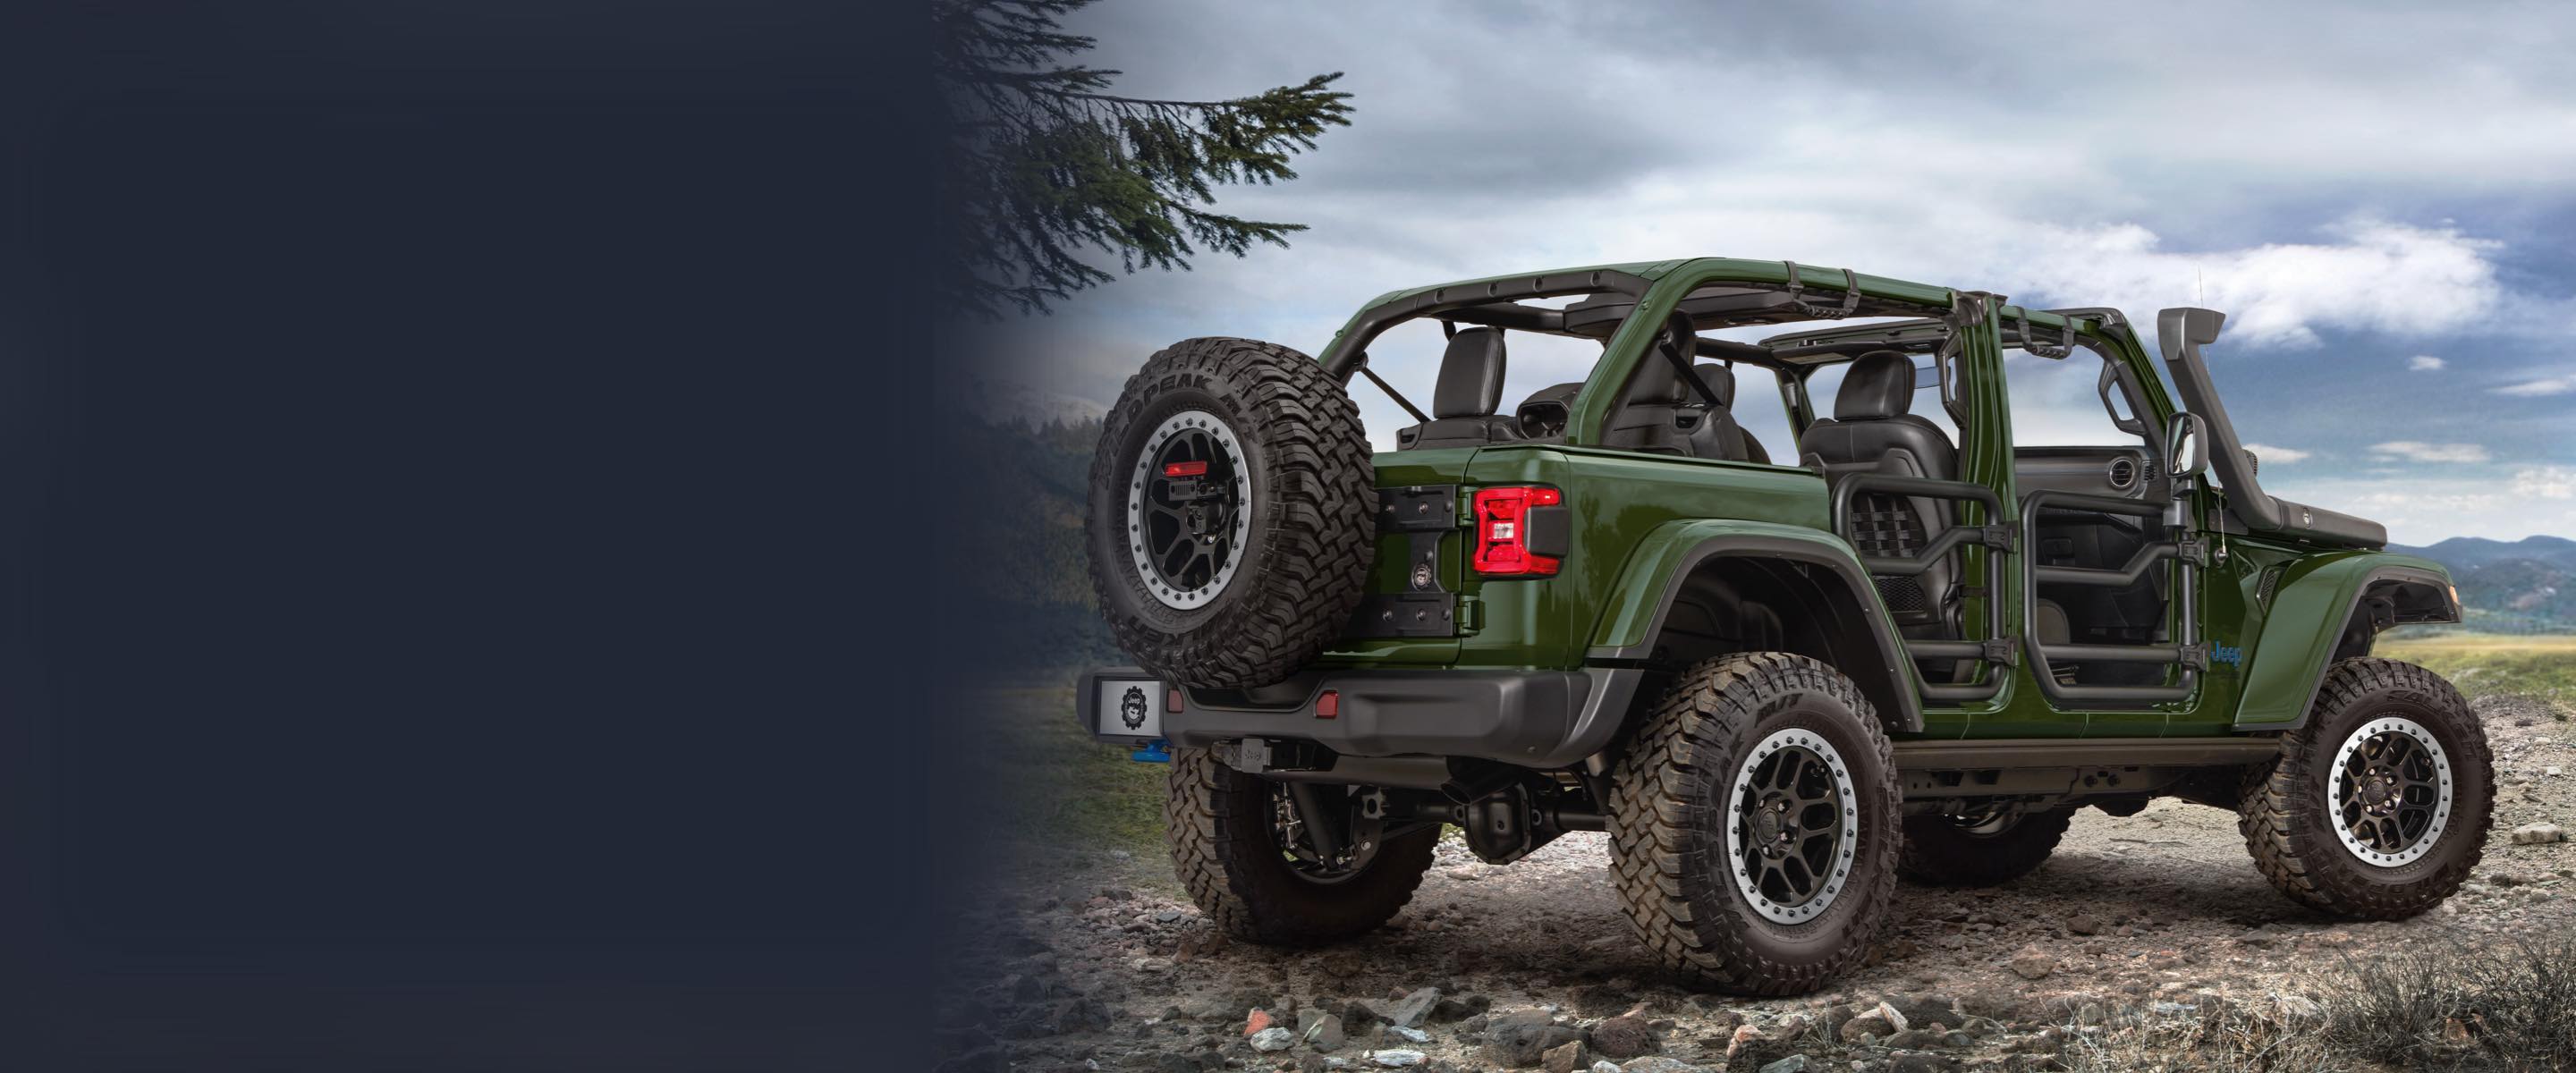 The 2022 Jeep Wrangler parked off-road. Its roof is off and it has been customized with an engine snorkel and tube doors.